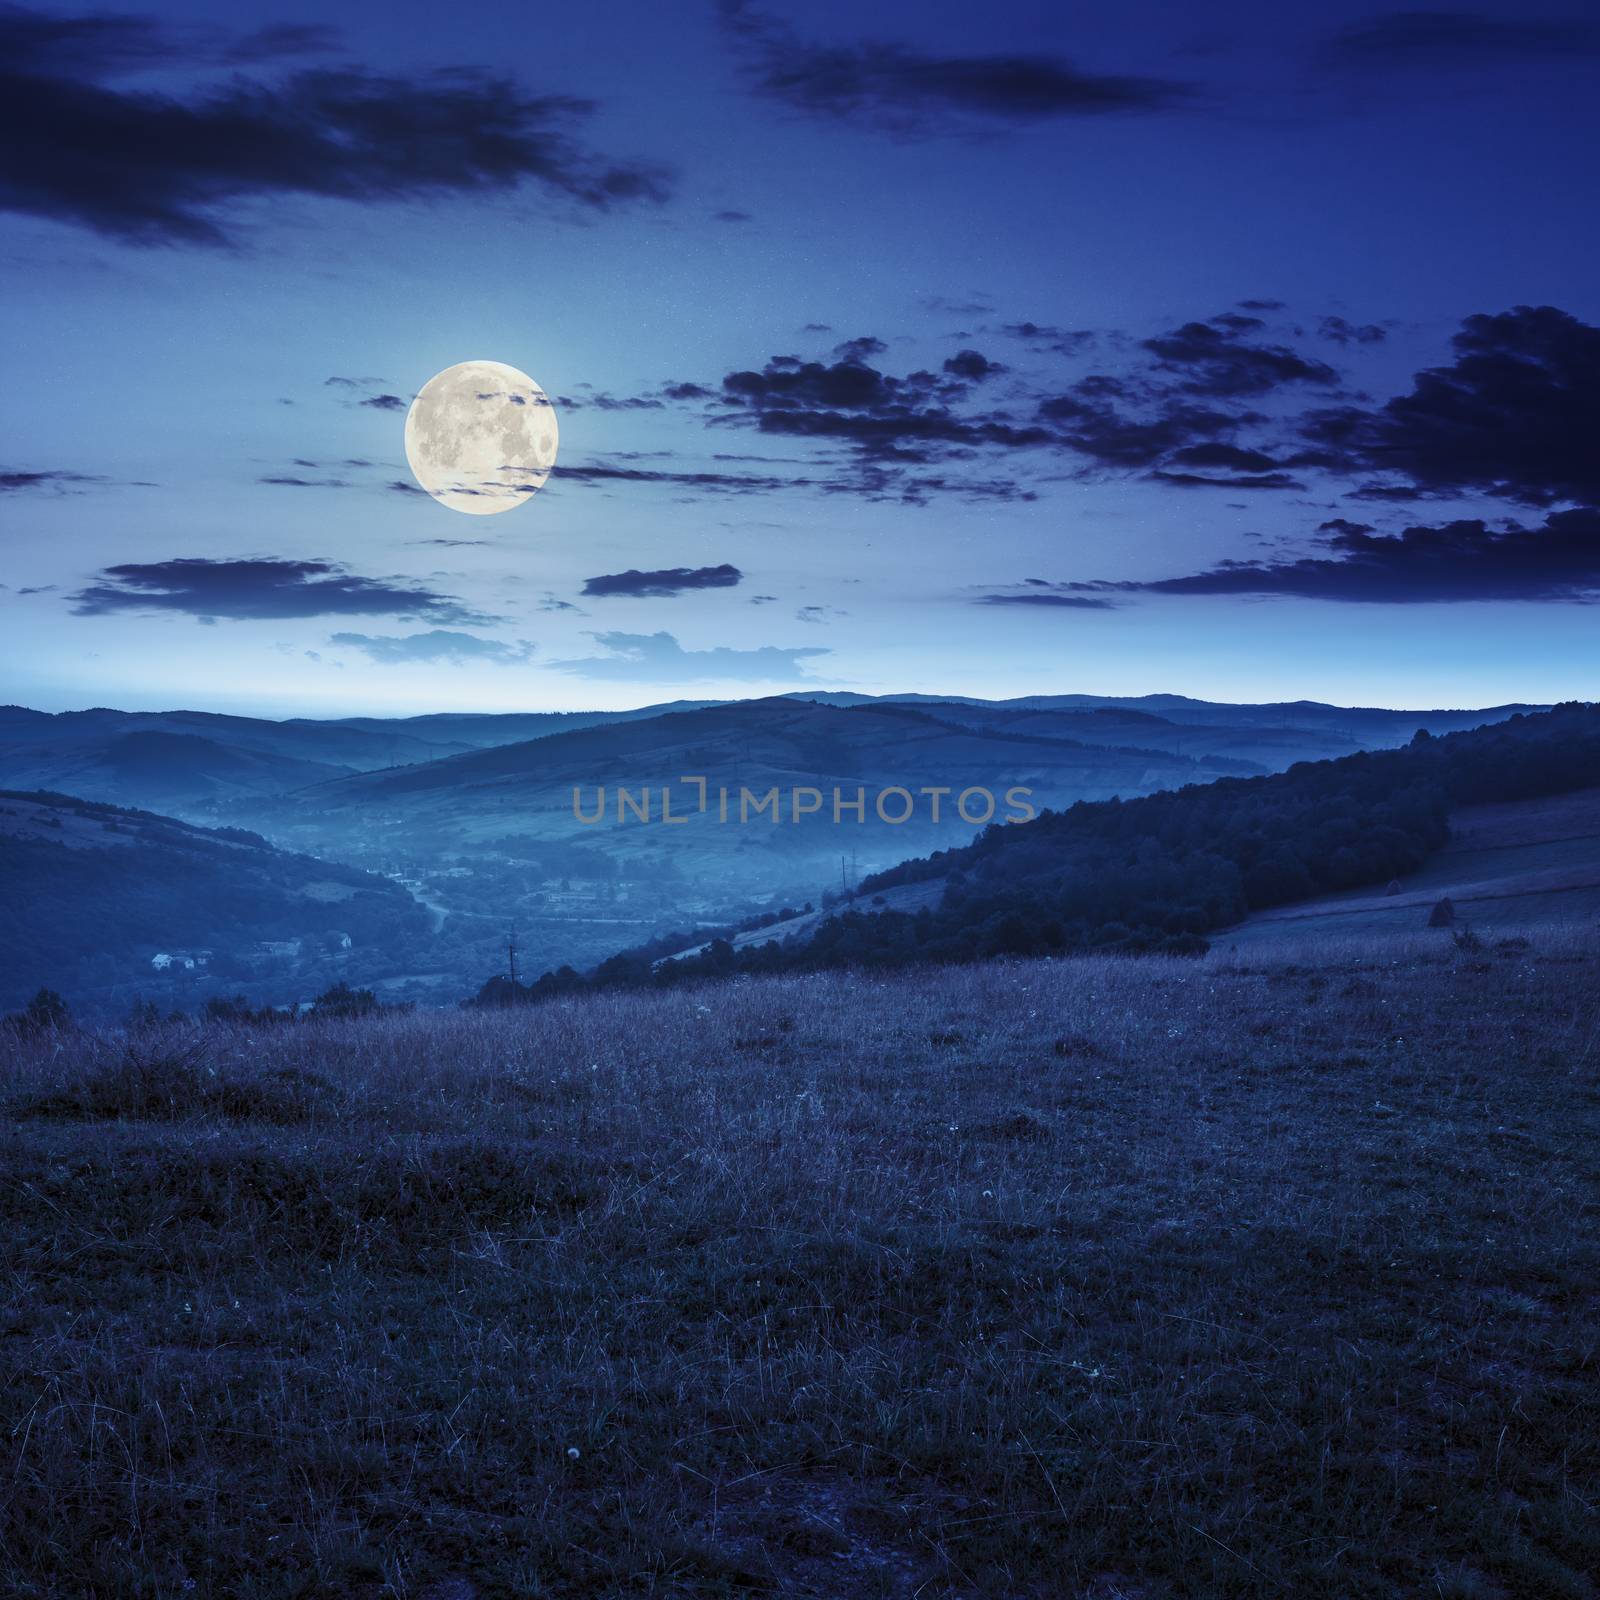 field in mountain near home at night by Pellinni